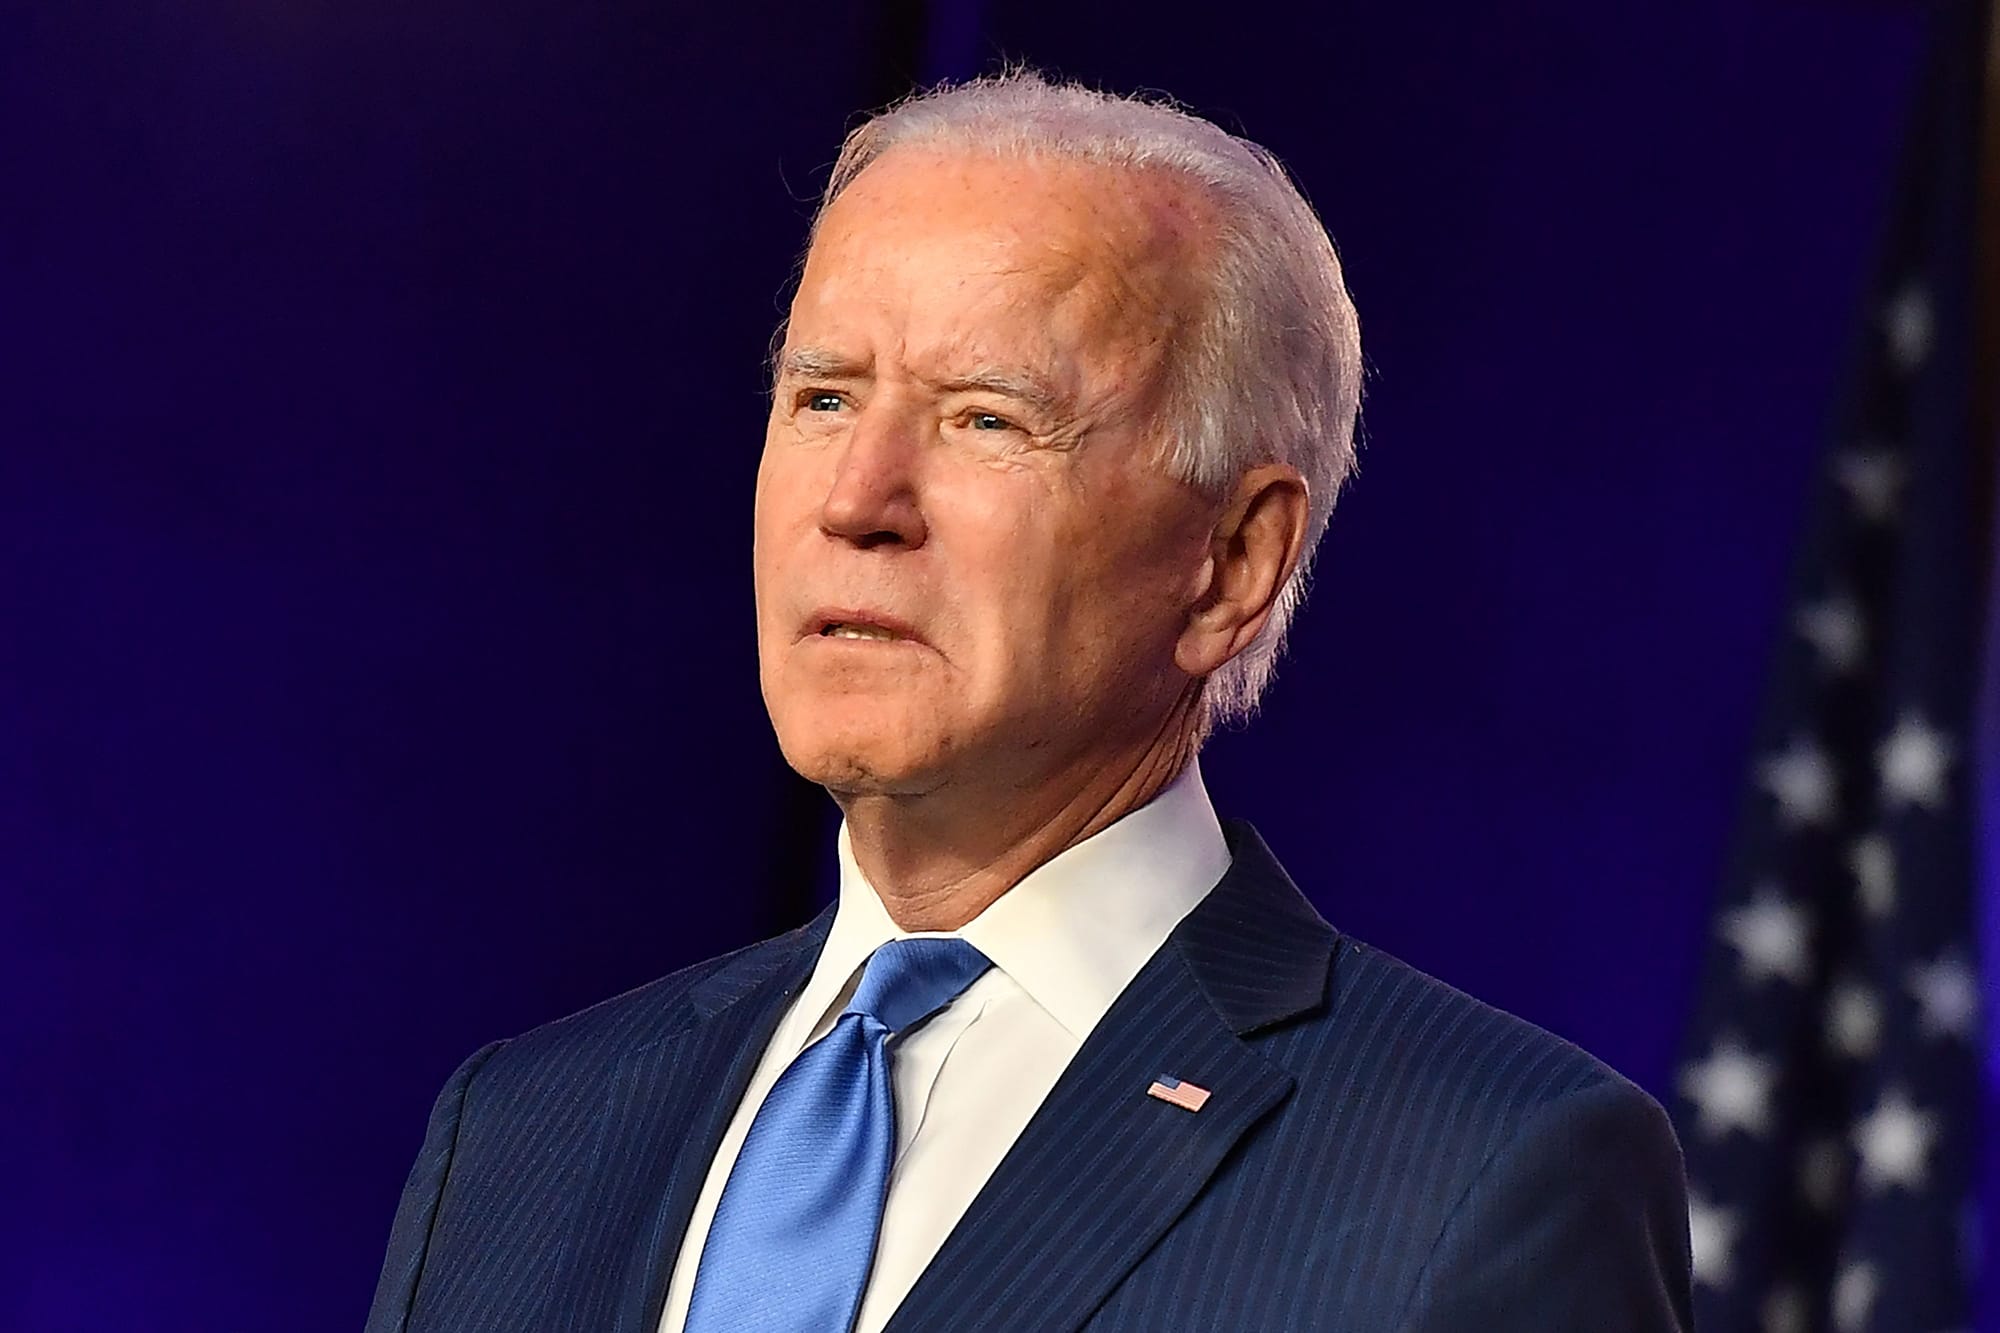 Biden's January Approval Hits Historic Low Among Modern Presidents in Election Year